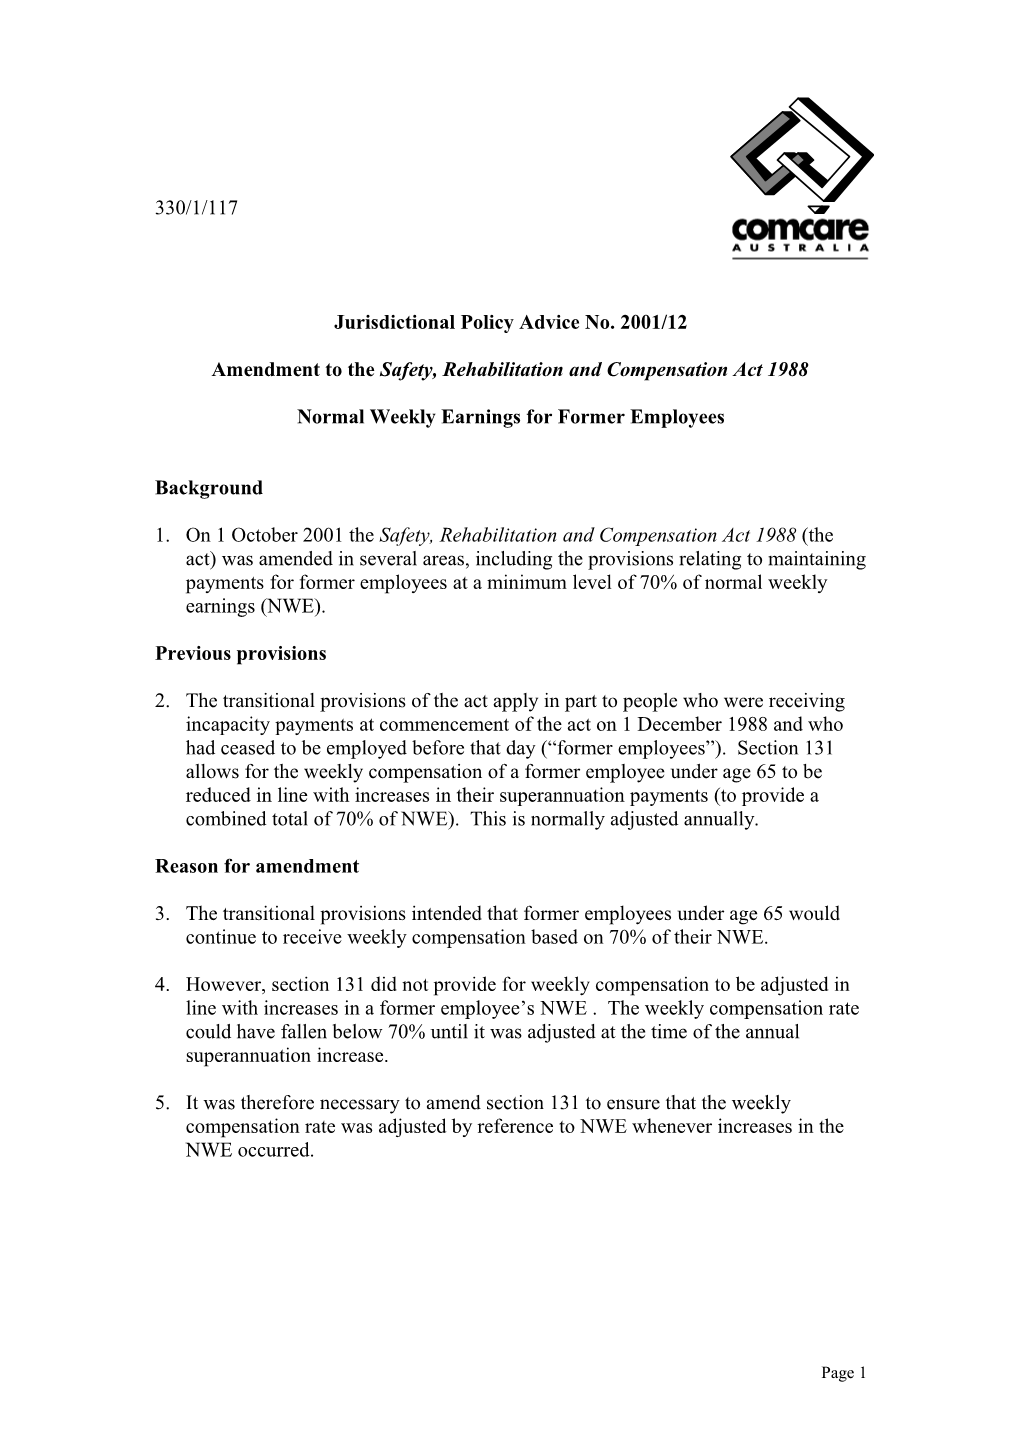 JPA 2001-12 Amendment to the SRC Act 1988 Normal Weekly Earnings for Former Employees